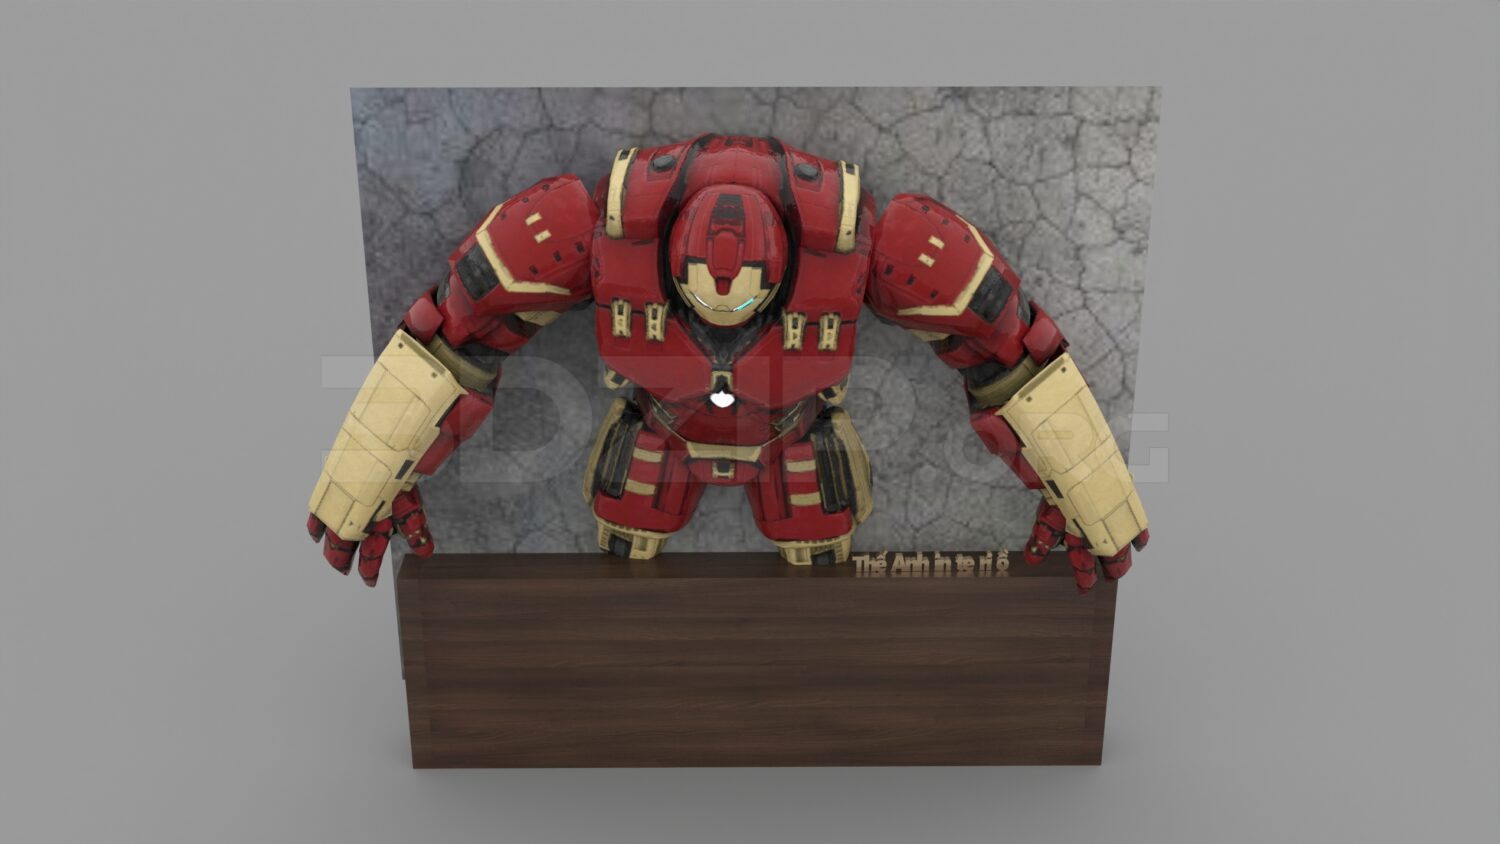 1889. Download Free IronMan Model By Luong Anh